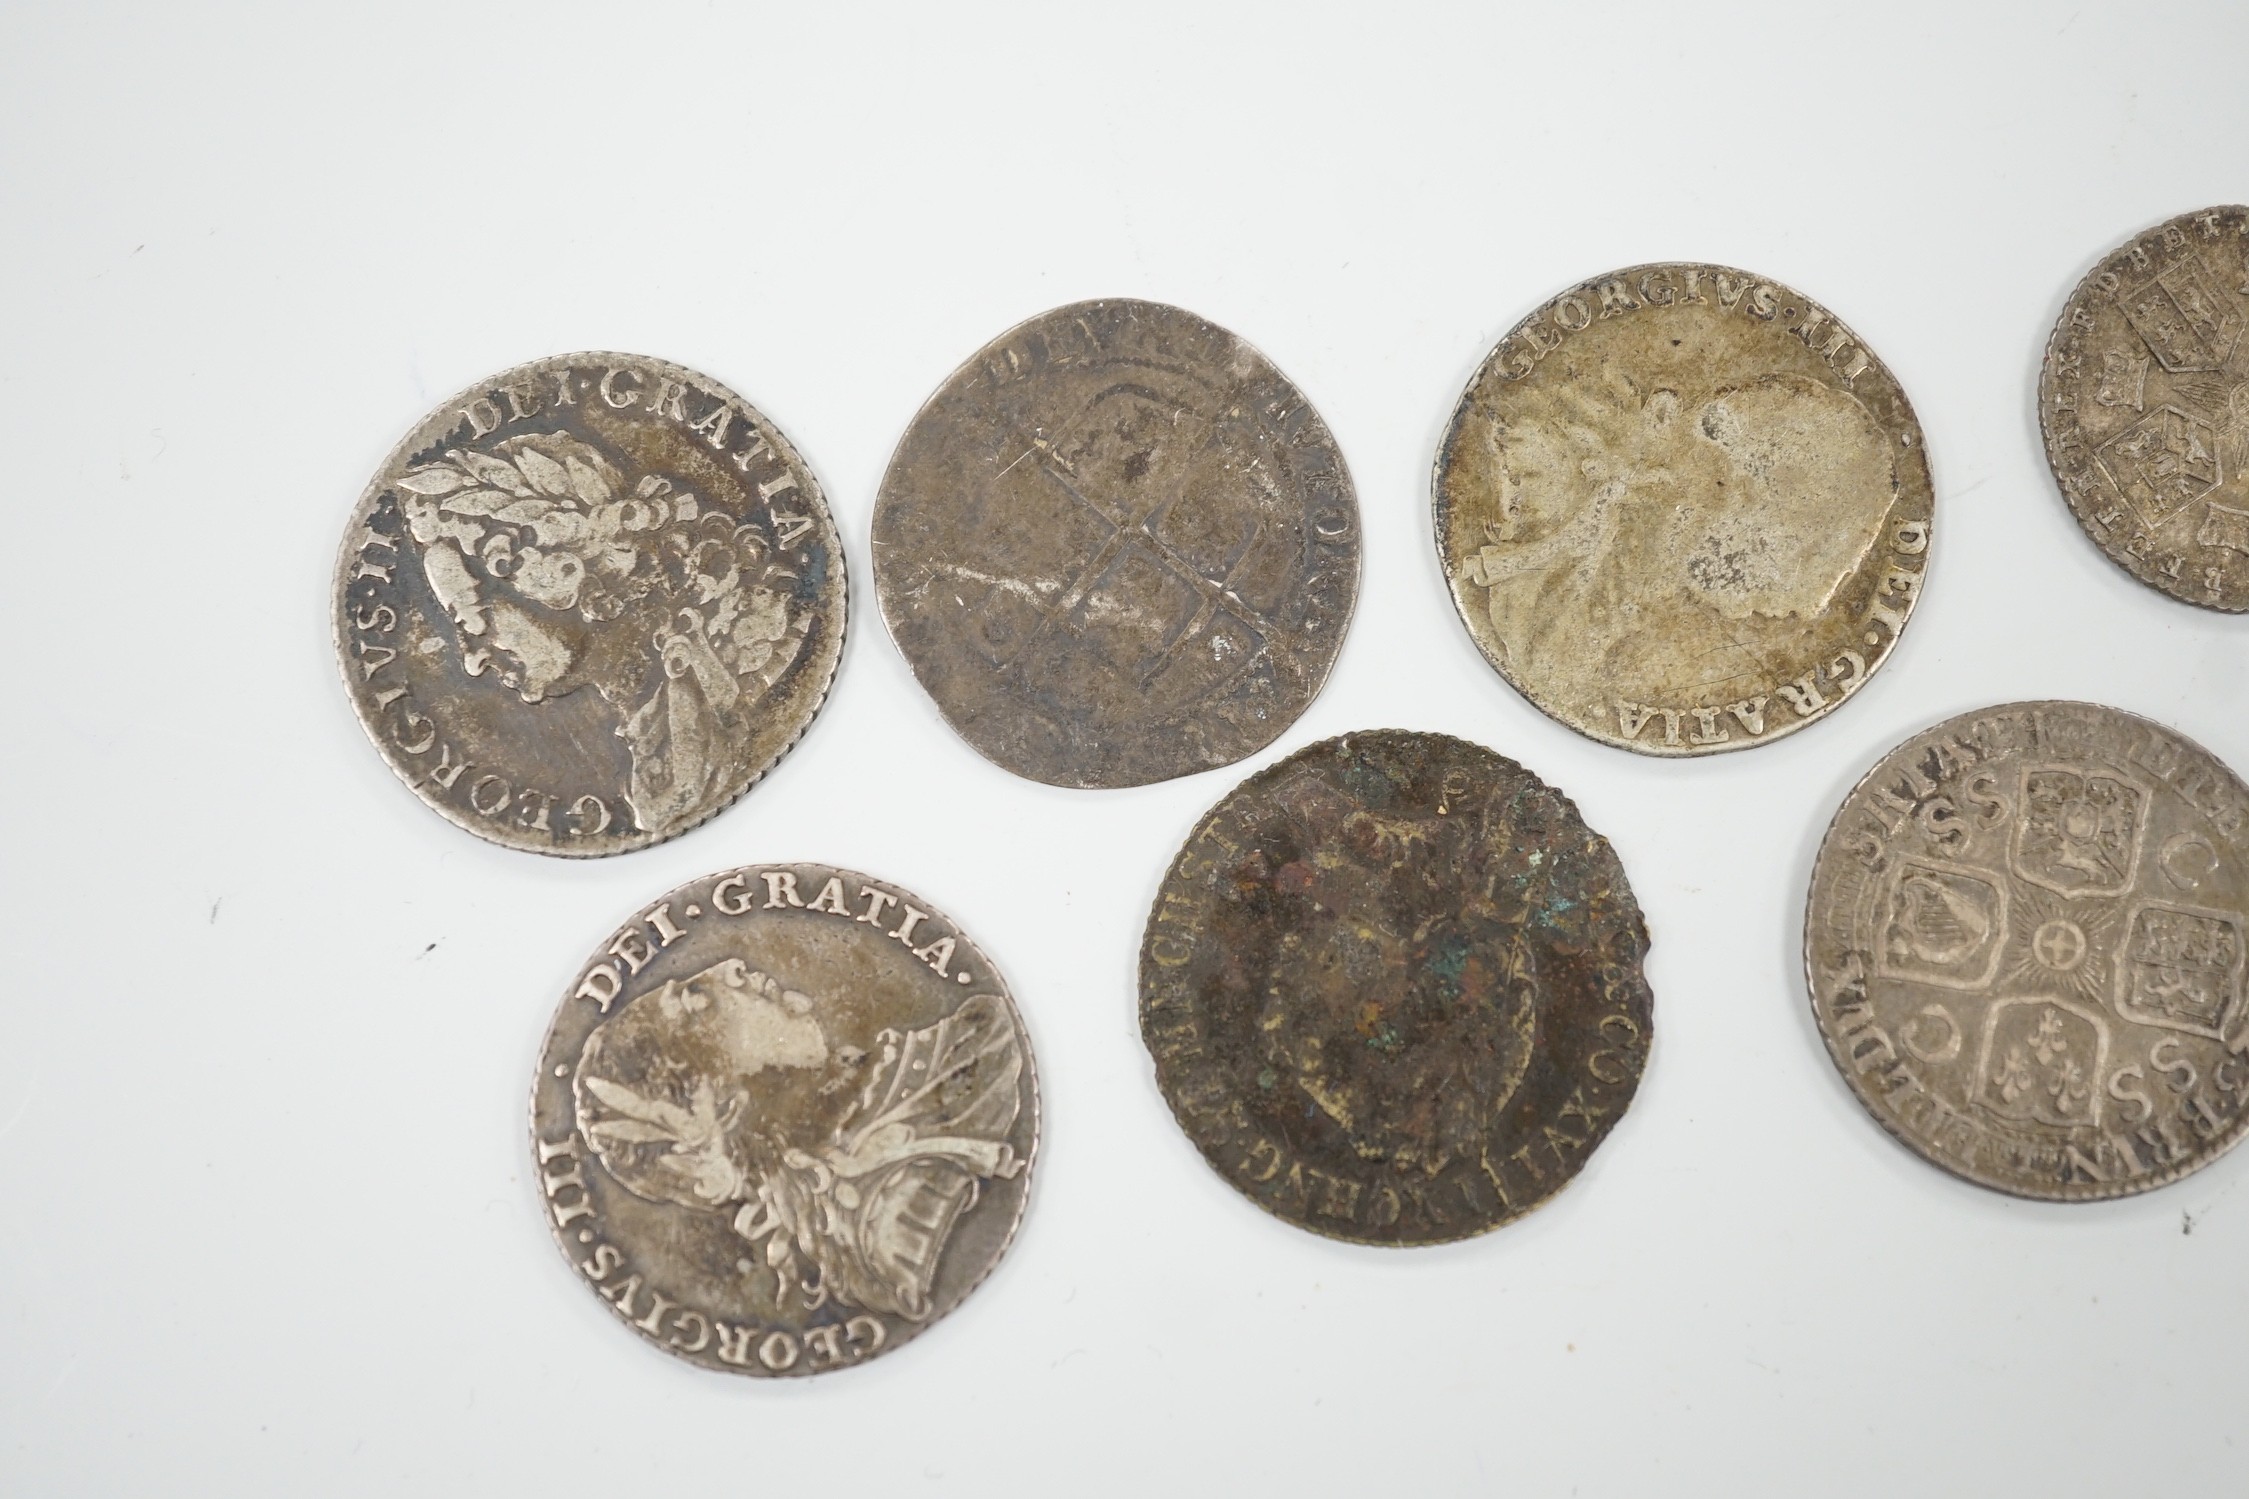 Four 18th century shillings, a sixpence an Elizabeth I coin and a token